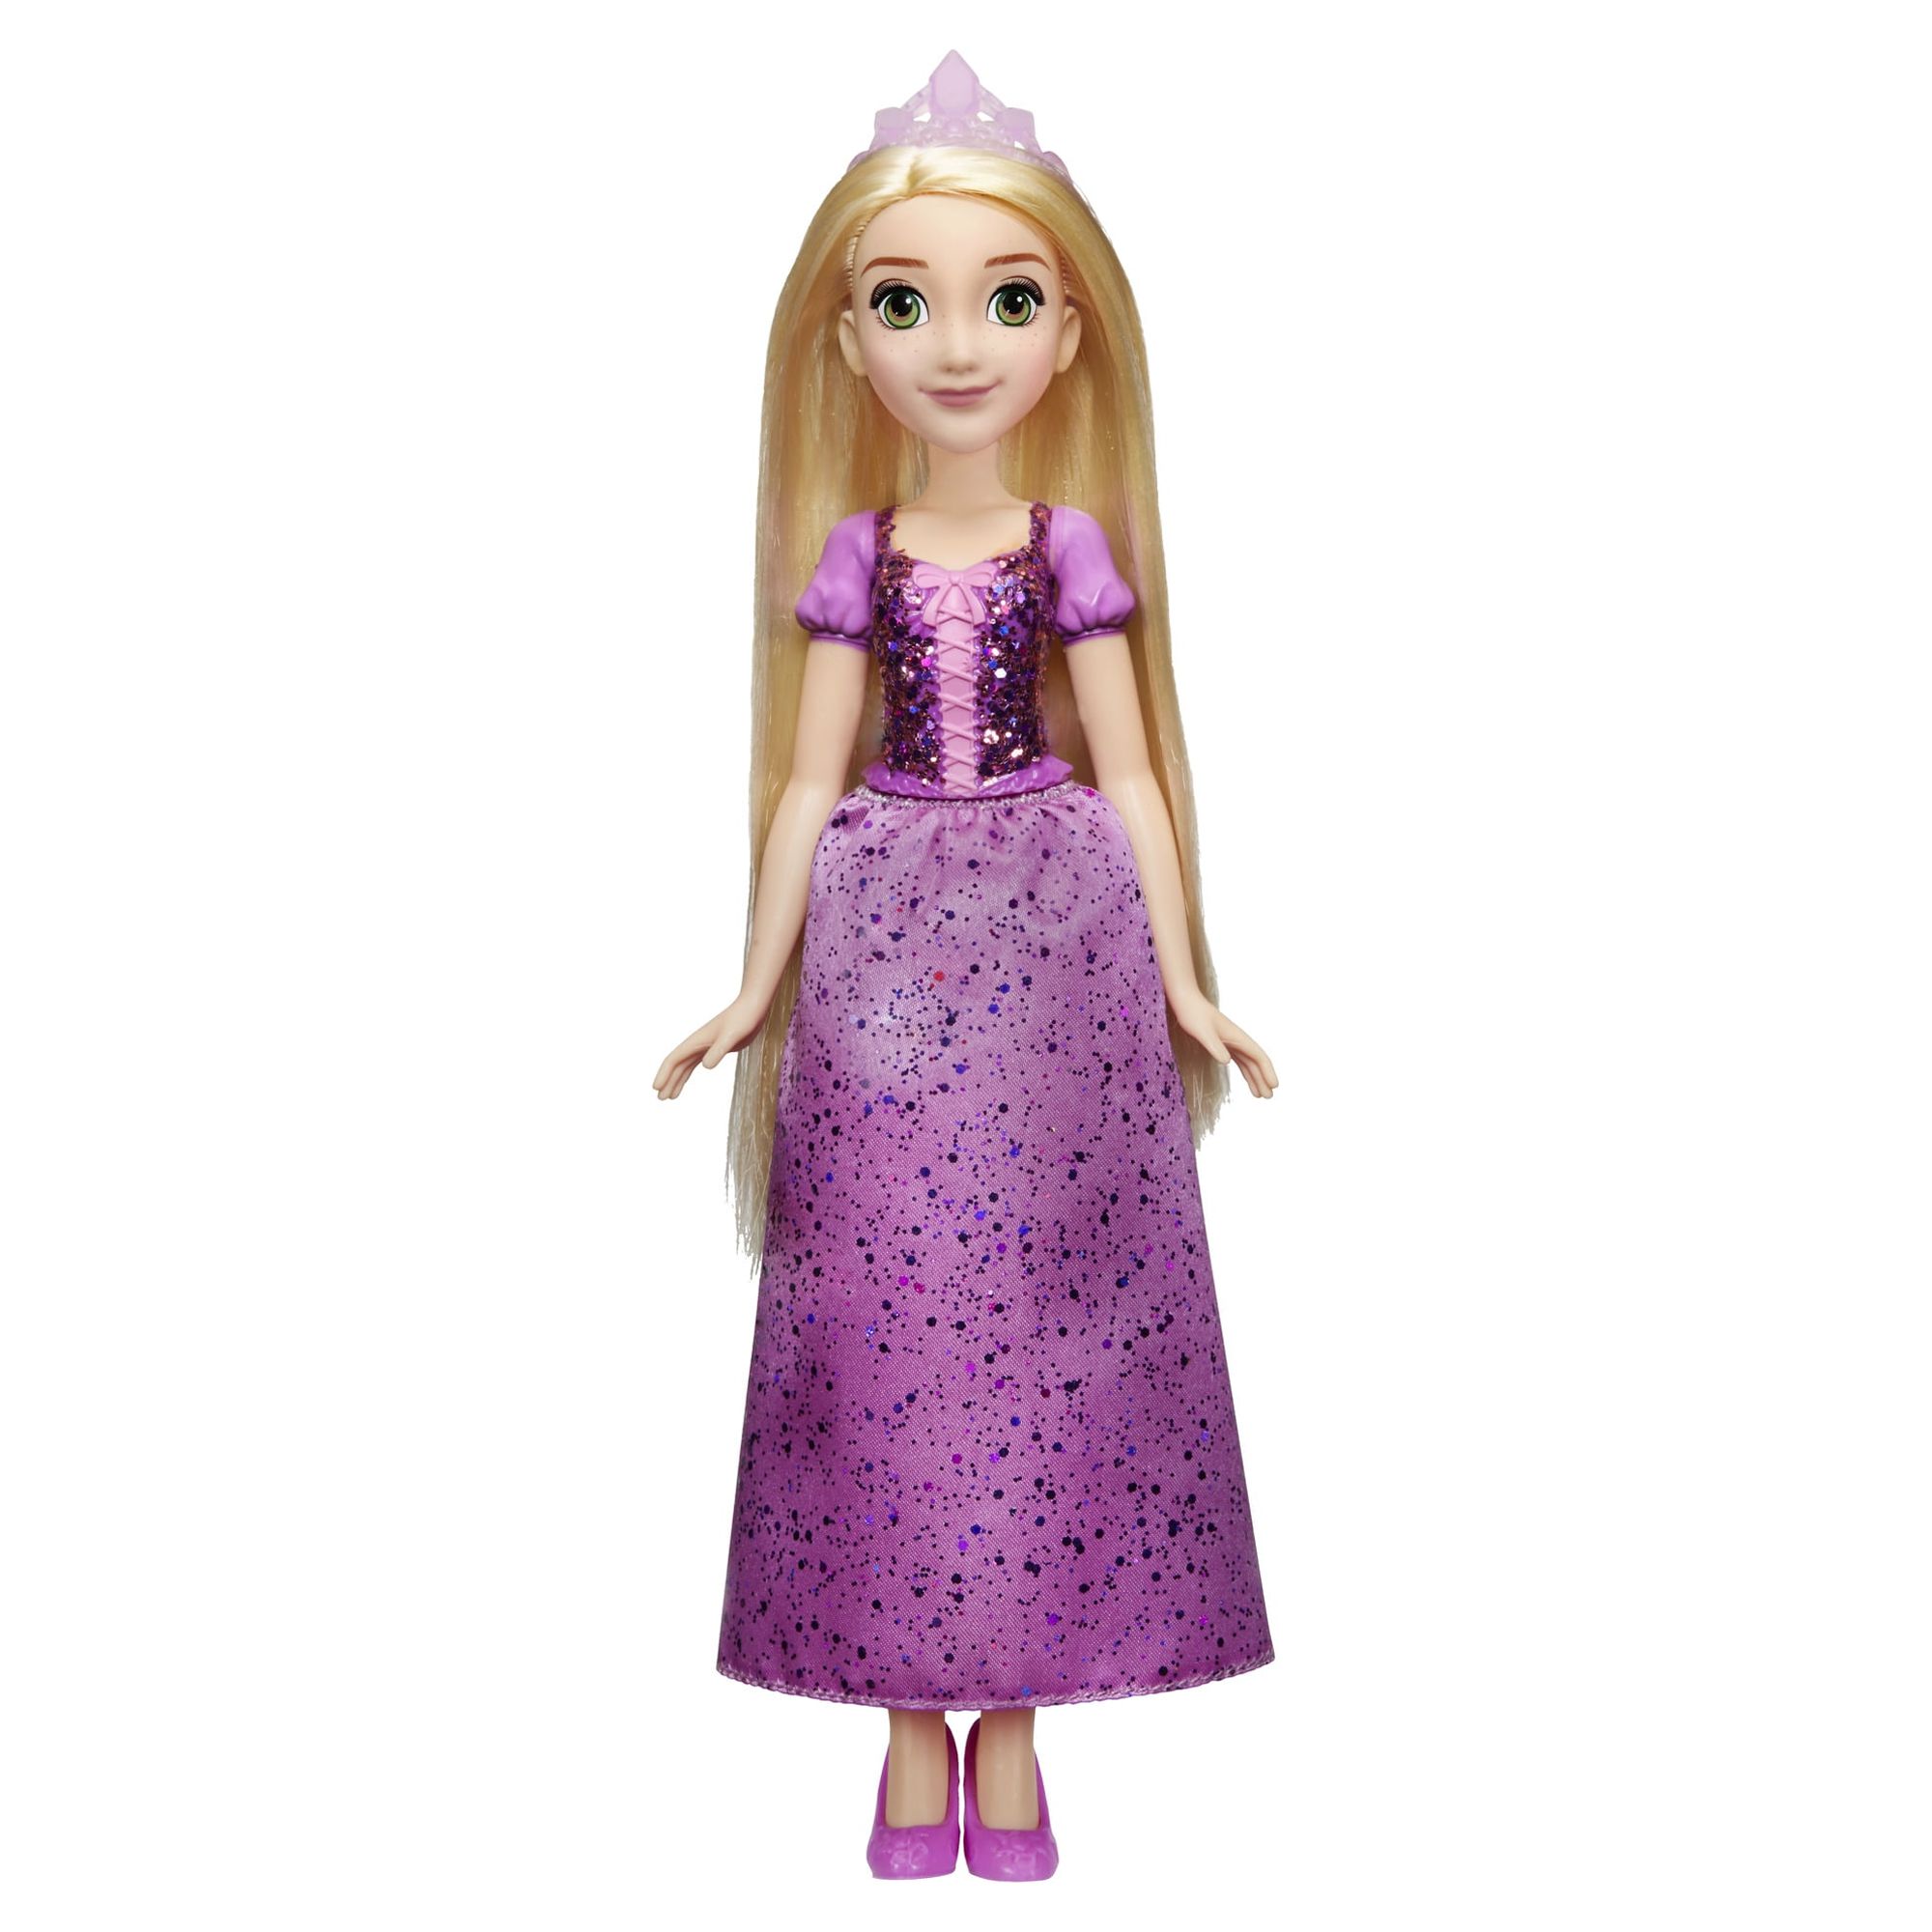 Disney Princess Royal Shimmer Rapunzel, Ages 3 and up, Includes Tiara and Shoes - image 1 of 10